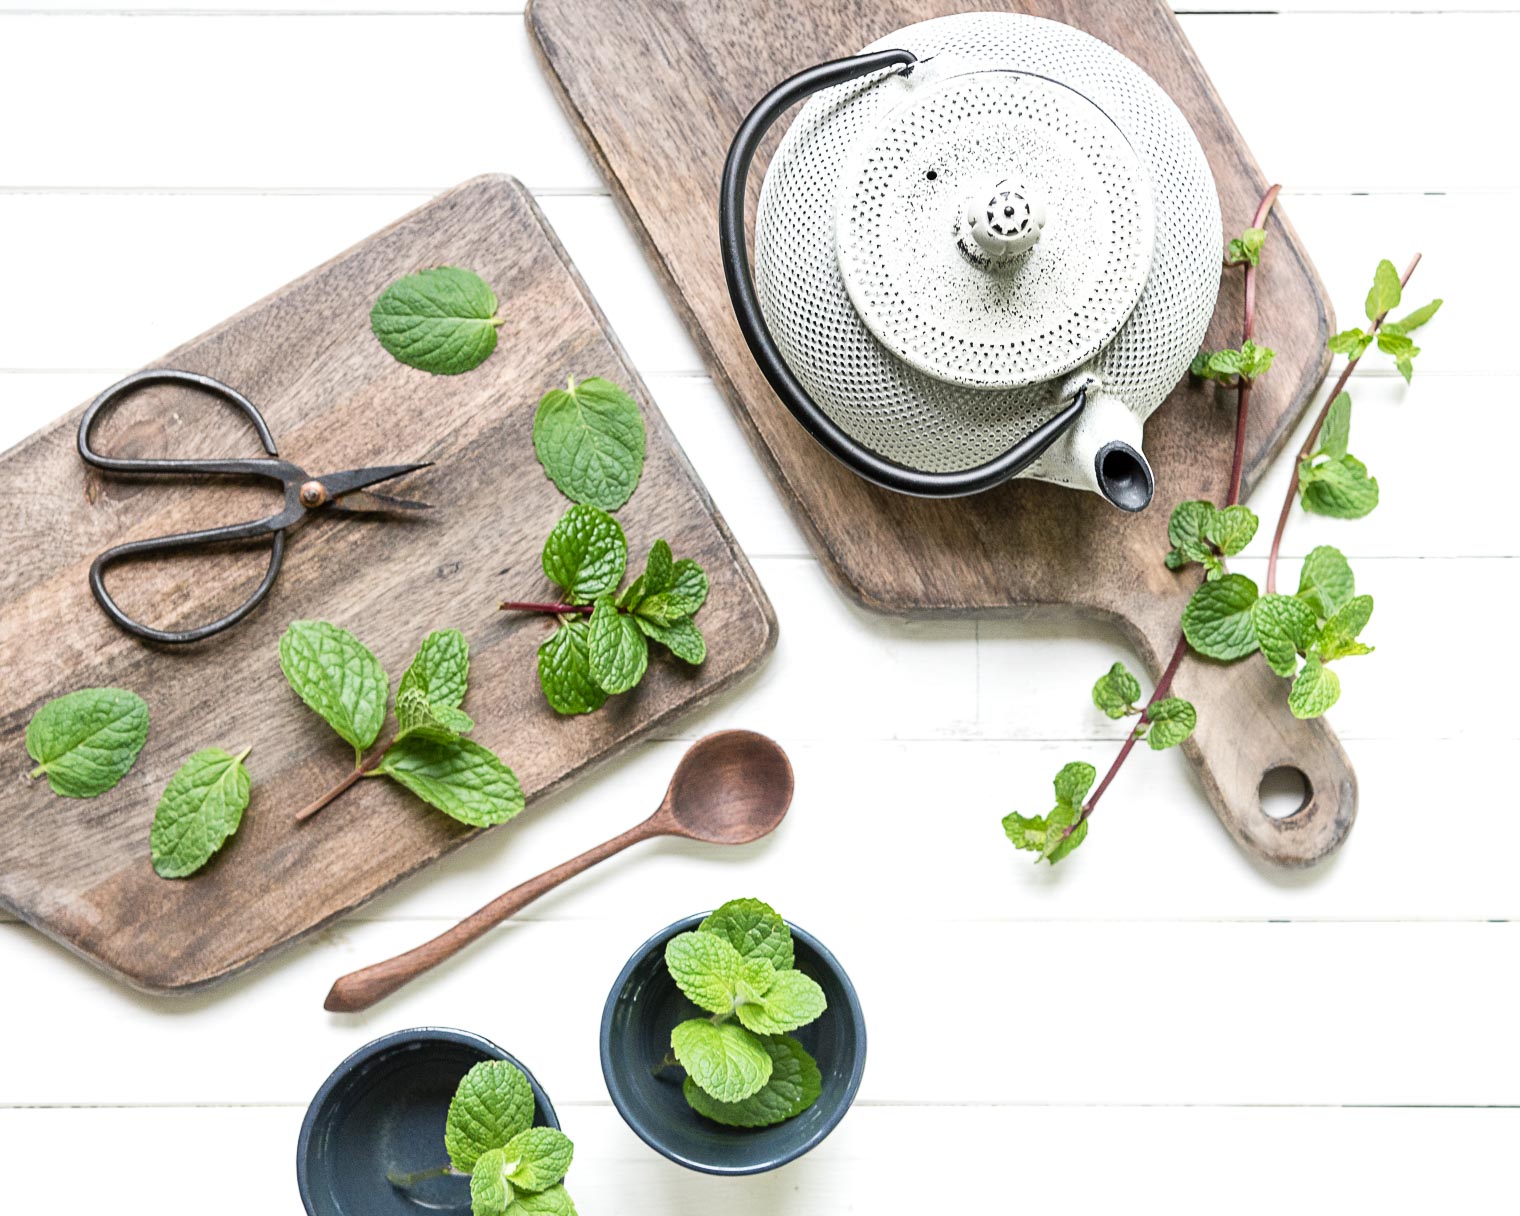 Mint tea is soothing and refreshing, and if you can use fresh mint it's especially delightful. Growing mint is easy and satisfying as this plant is vigorous and aggressive. If you're growing mint, I would suggest you plant it in a container up off the ground or it will take over your garden!